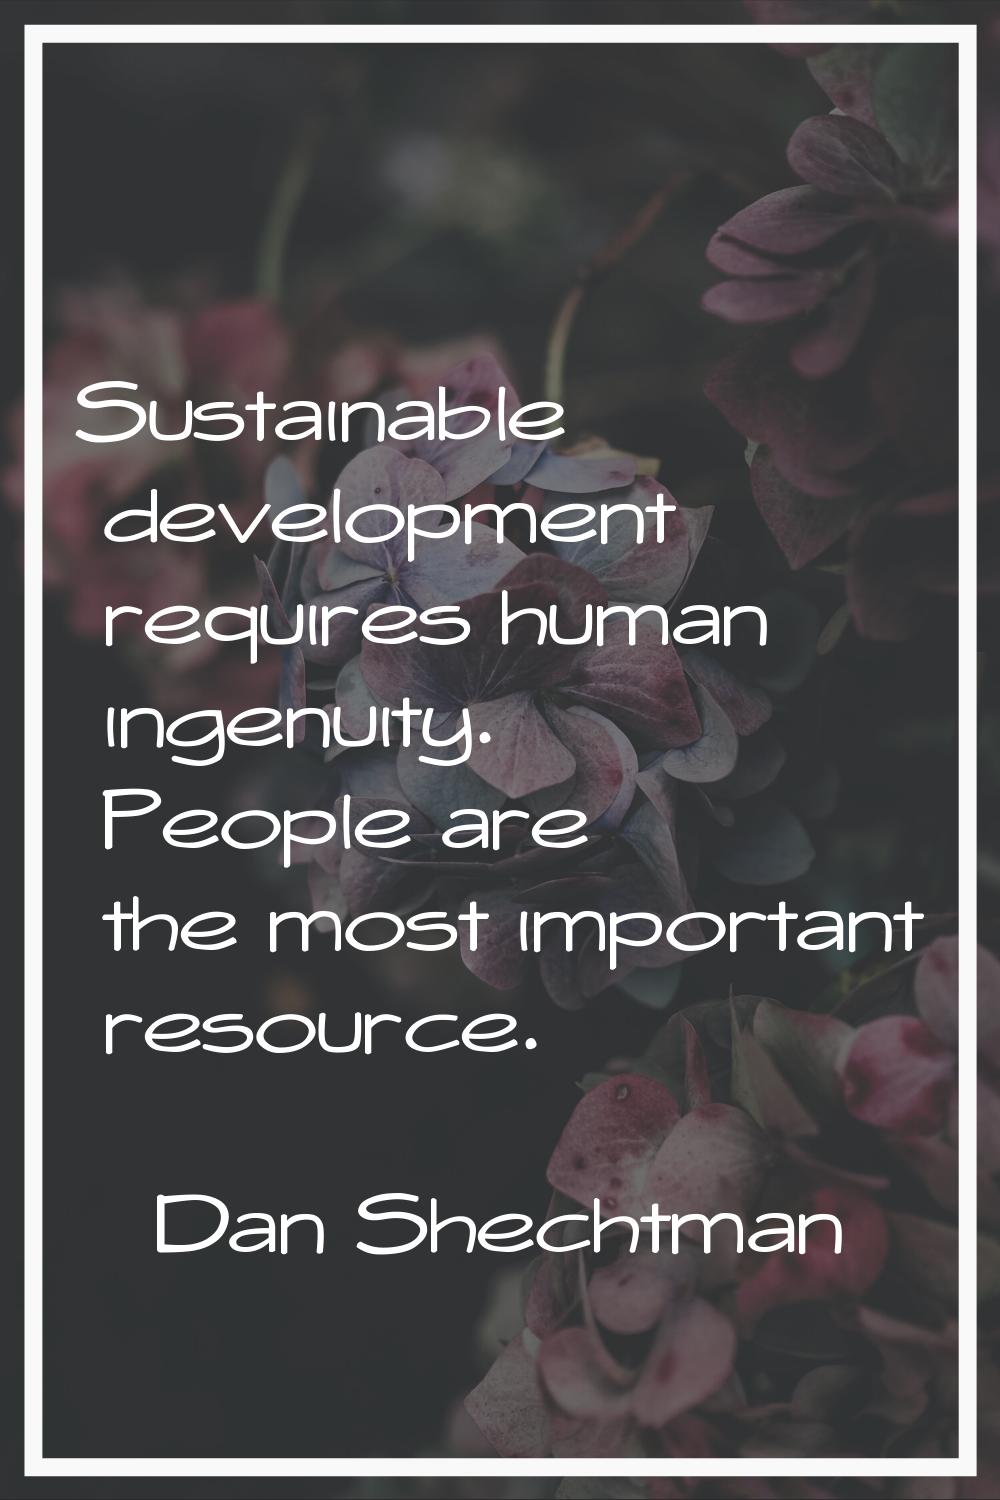 Sustainable development requires human ingenuity. People are the most important resource.